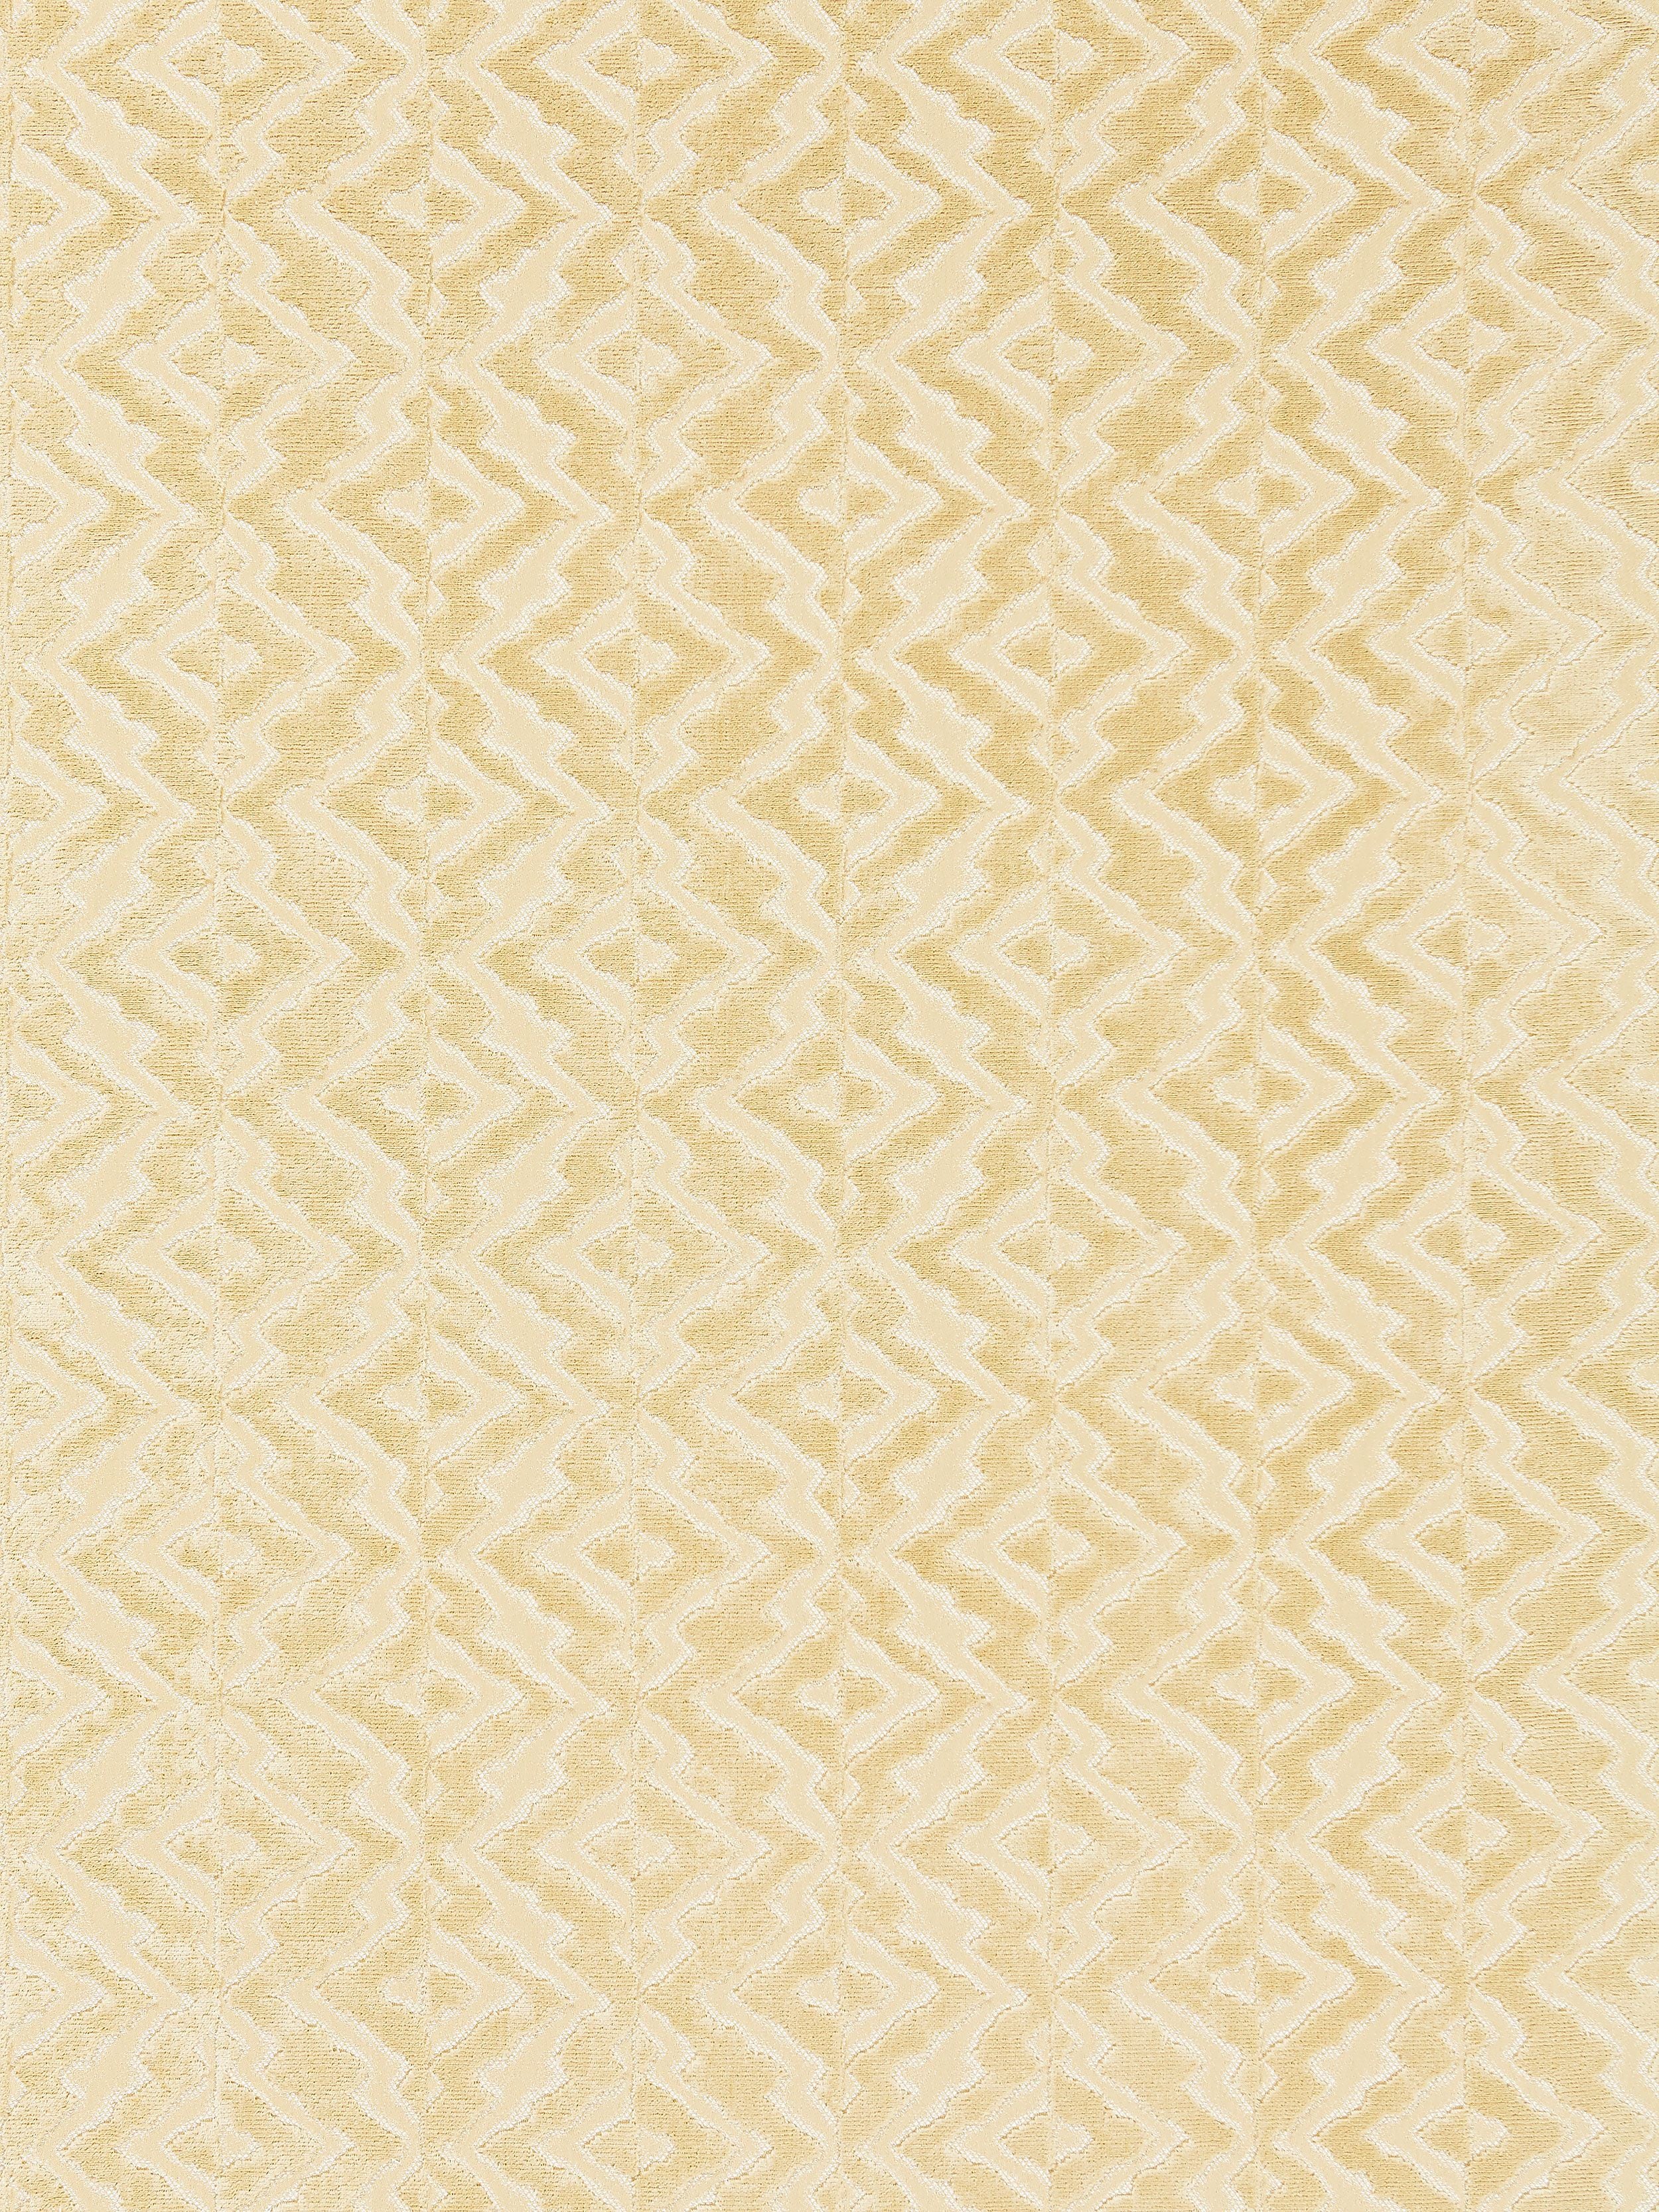 Echo Velvet fabric in chamois color - pattern number SC 000227085 - by Scalamandre in the Scalamandre Fabrics Book 1 collection